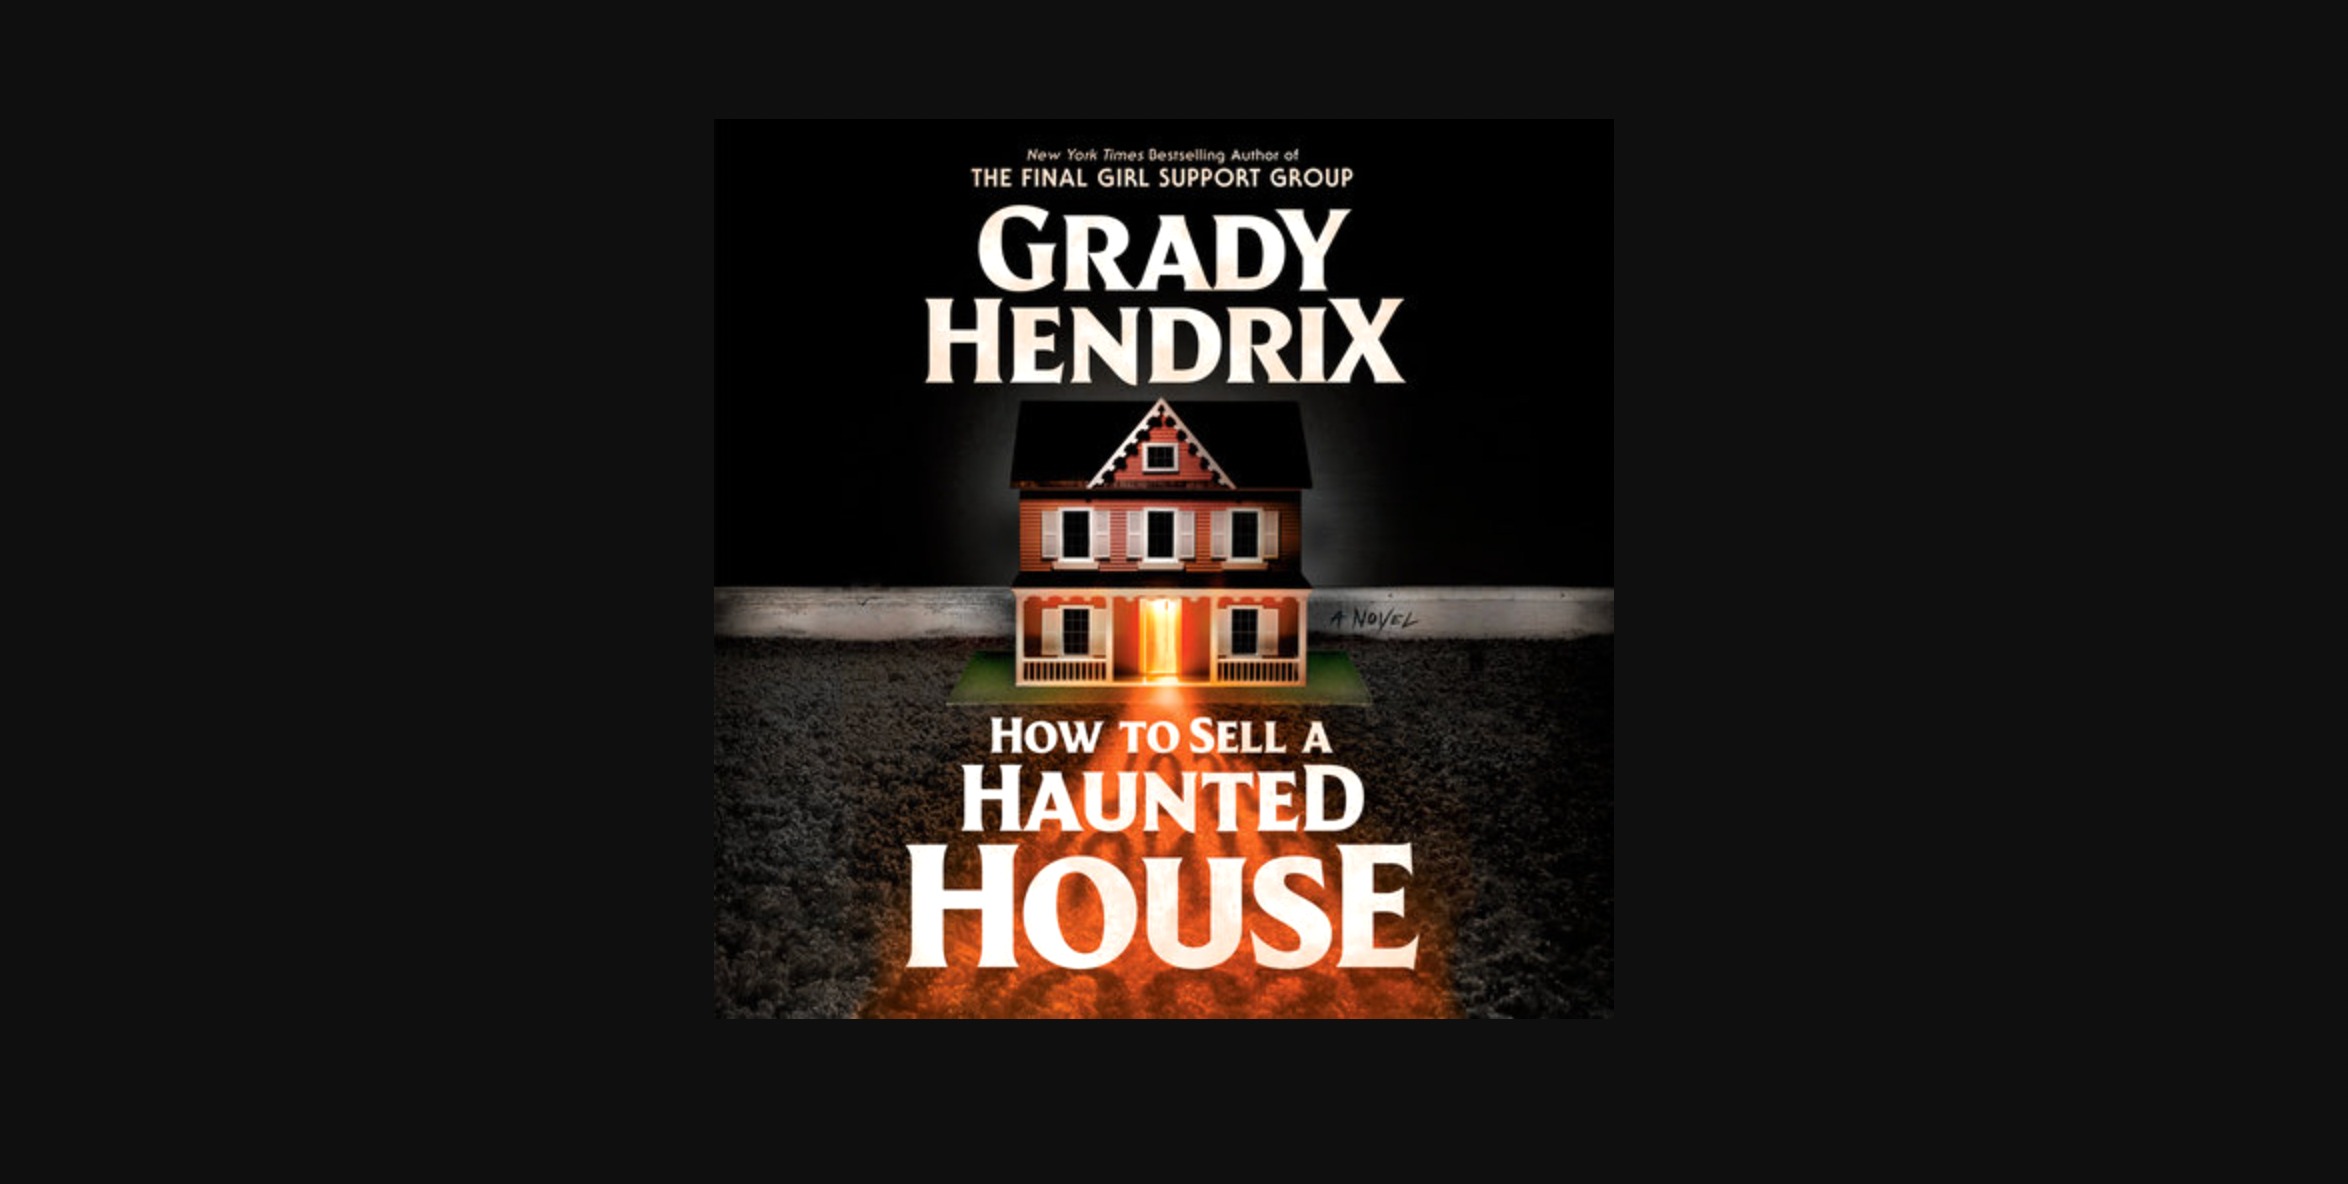 'How to Sell a Haunted House' by Grady Hendrix is much more than the sum of its tropes